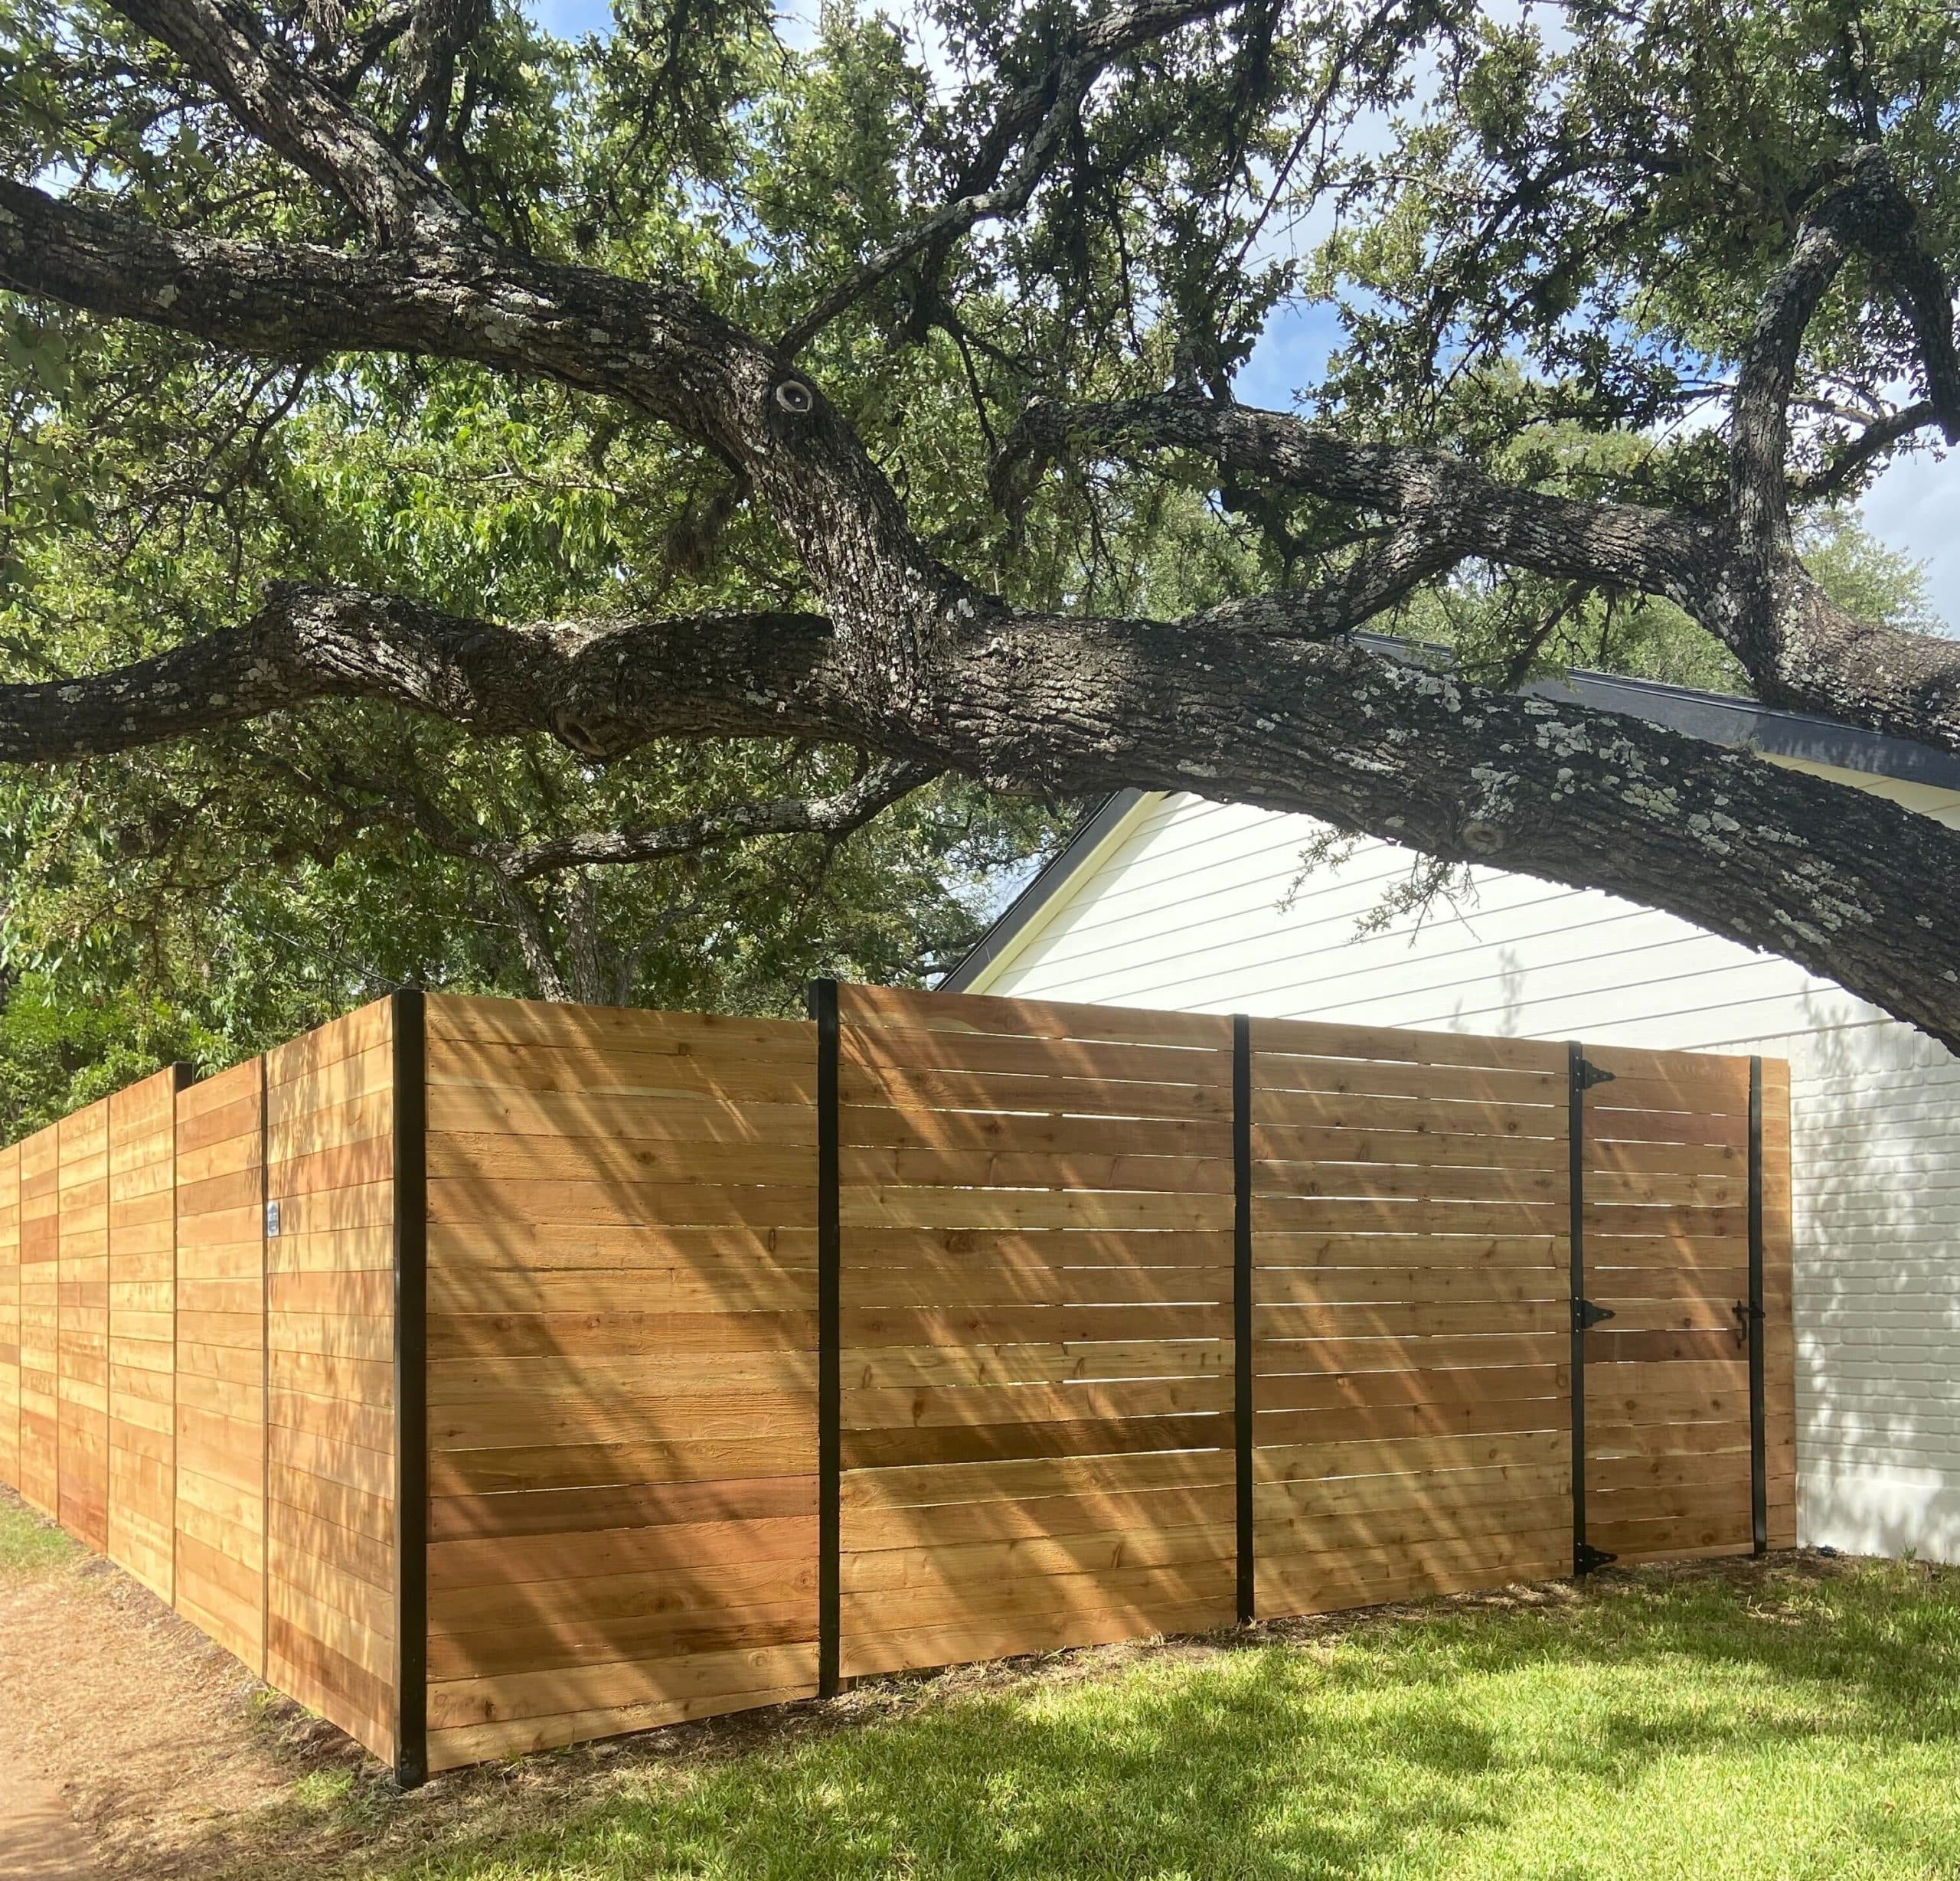 Horizontal wood fence with exposed black posts